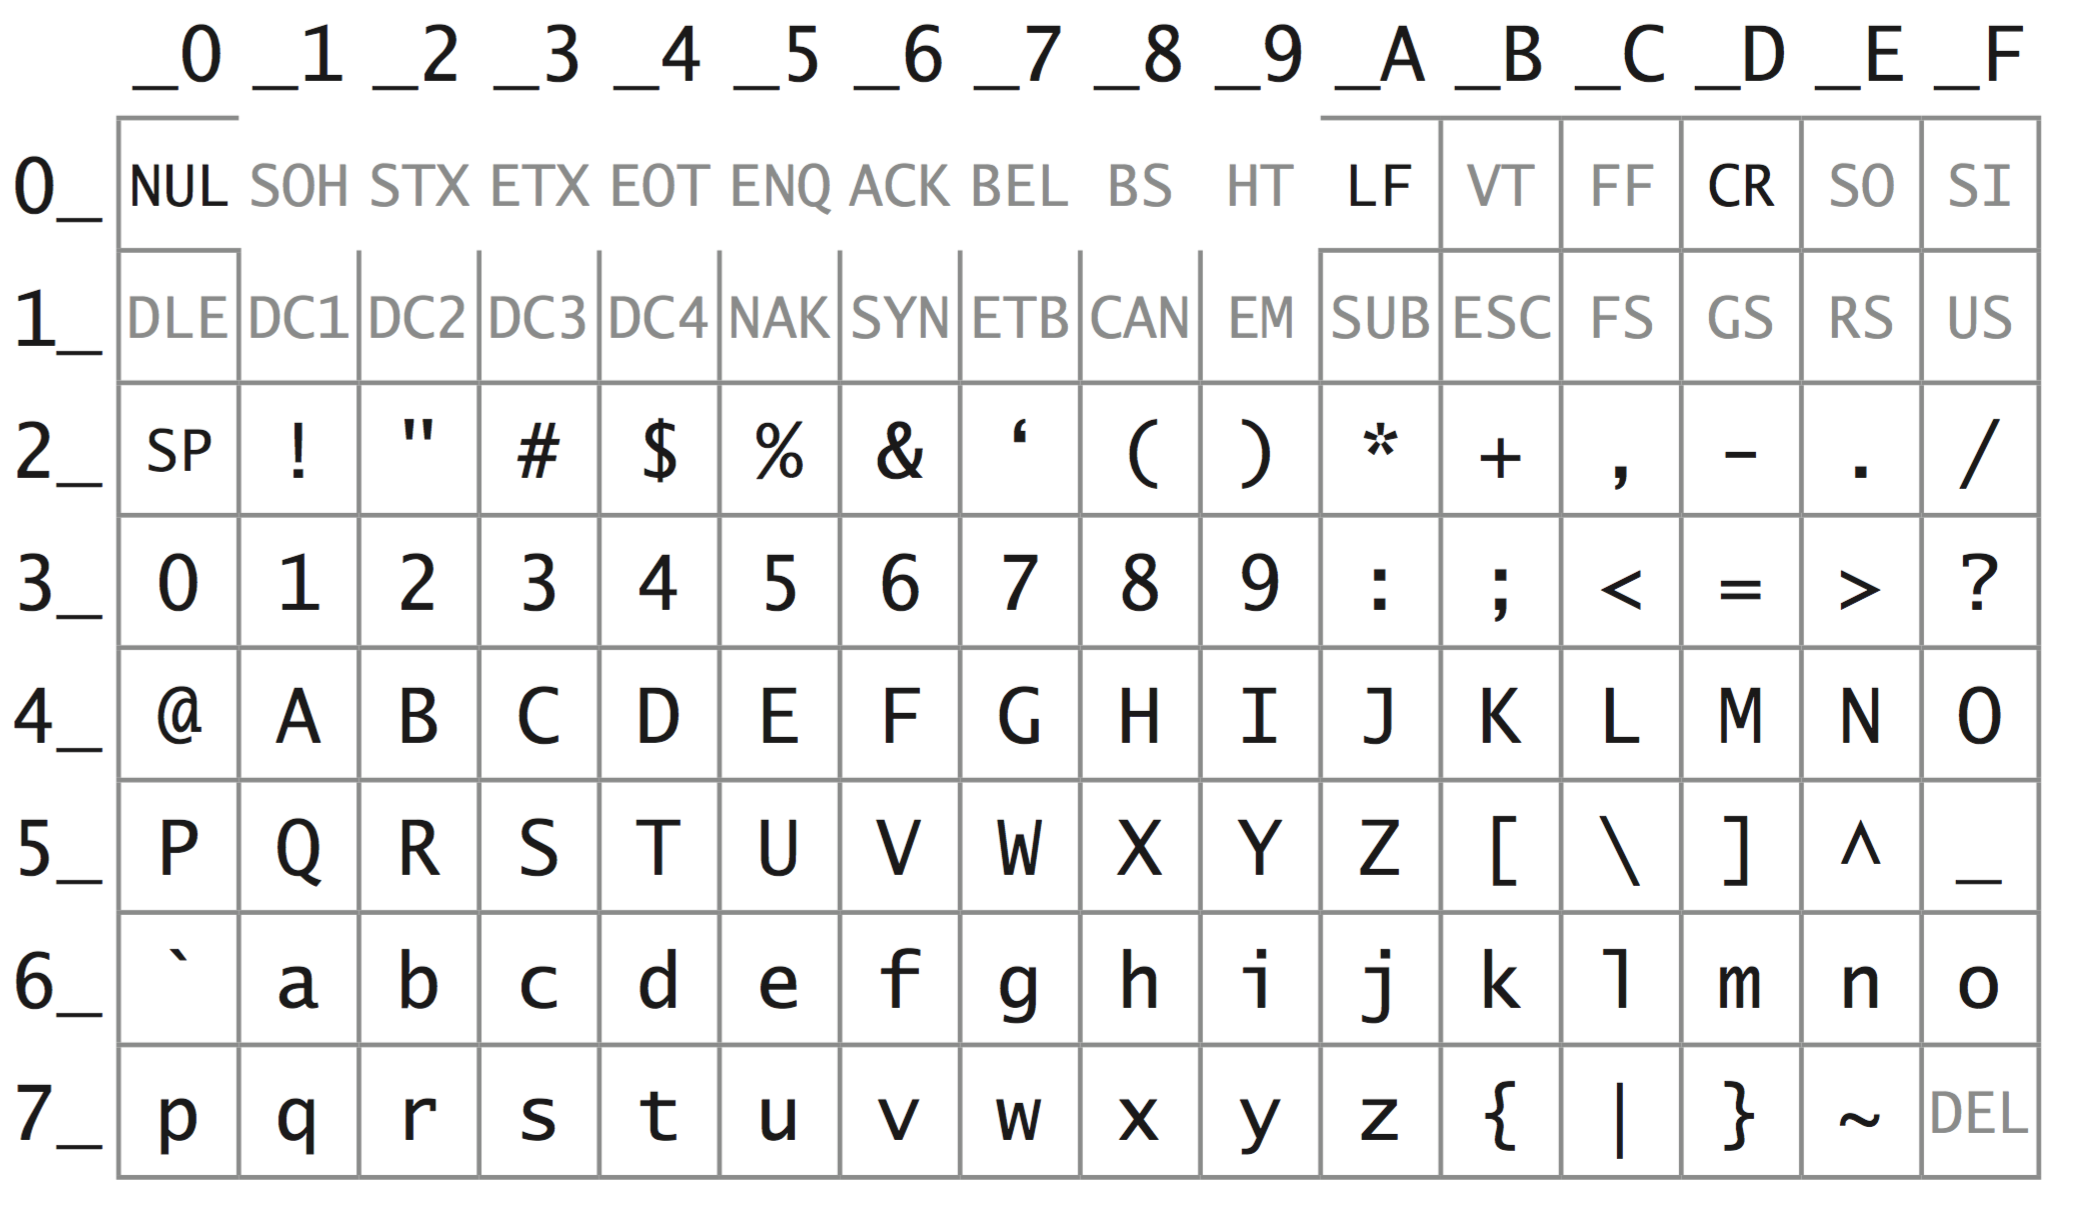 ascii-numbering-system-conversion-from-hex-to-ascii-and-vice-versa